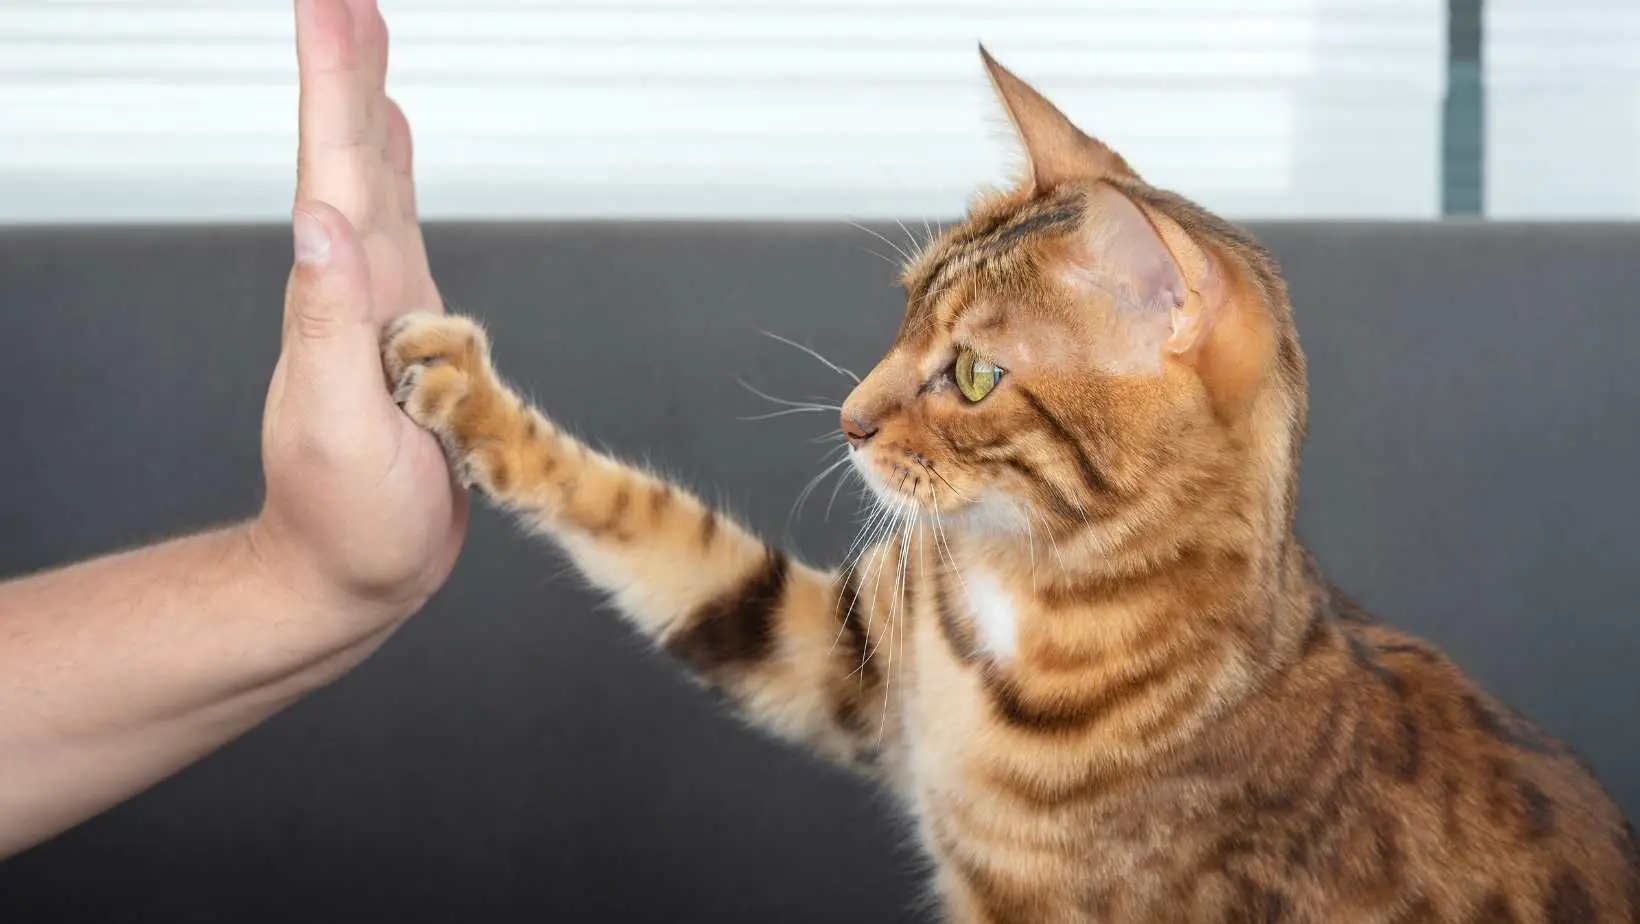 5 Tips on Getting Your Cat’s Trust